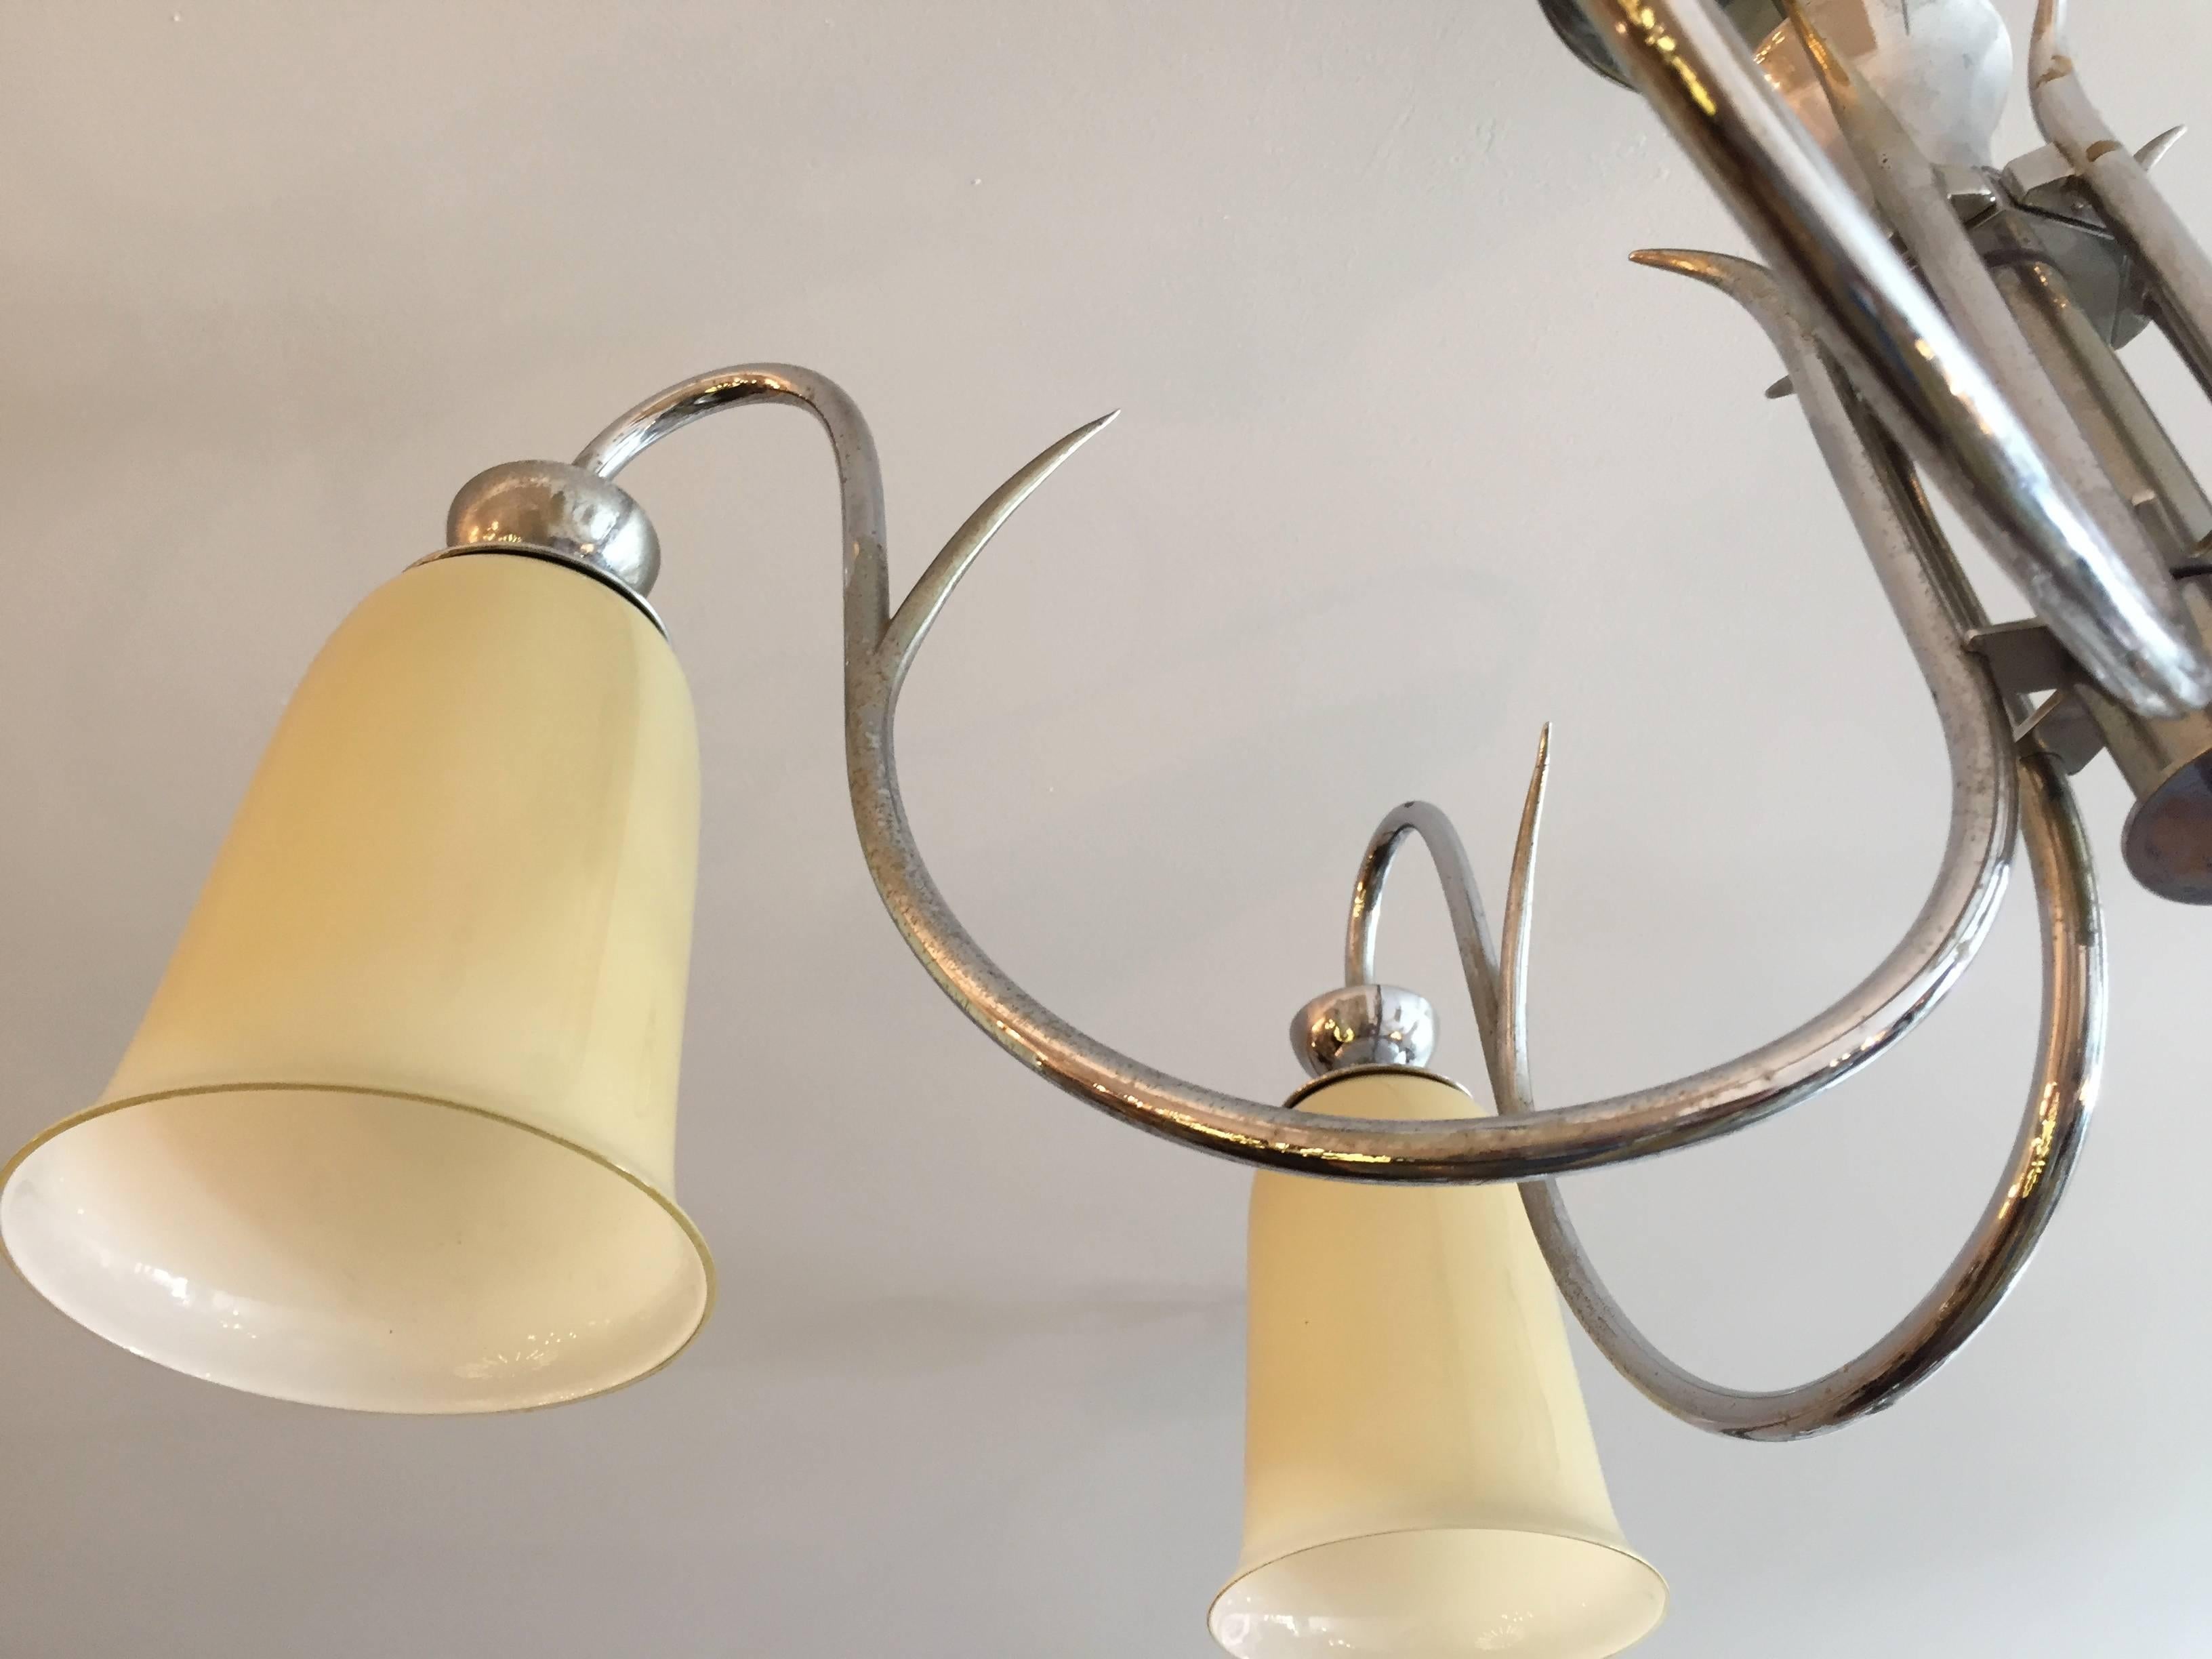 Austrian Art Deco 1920s Flush Ceiling Light In Excellent Condition For Sale In New York, NY